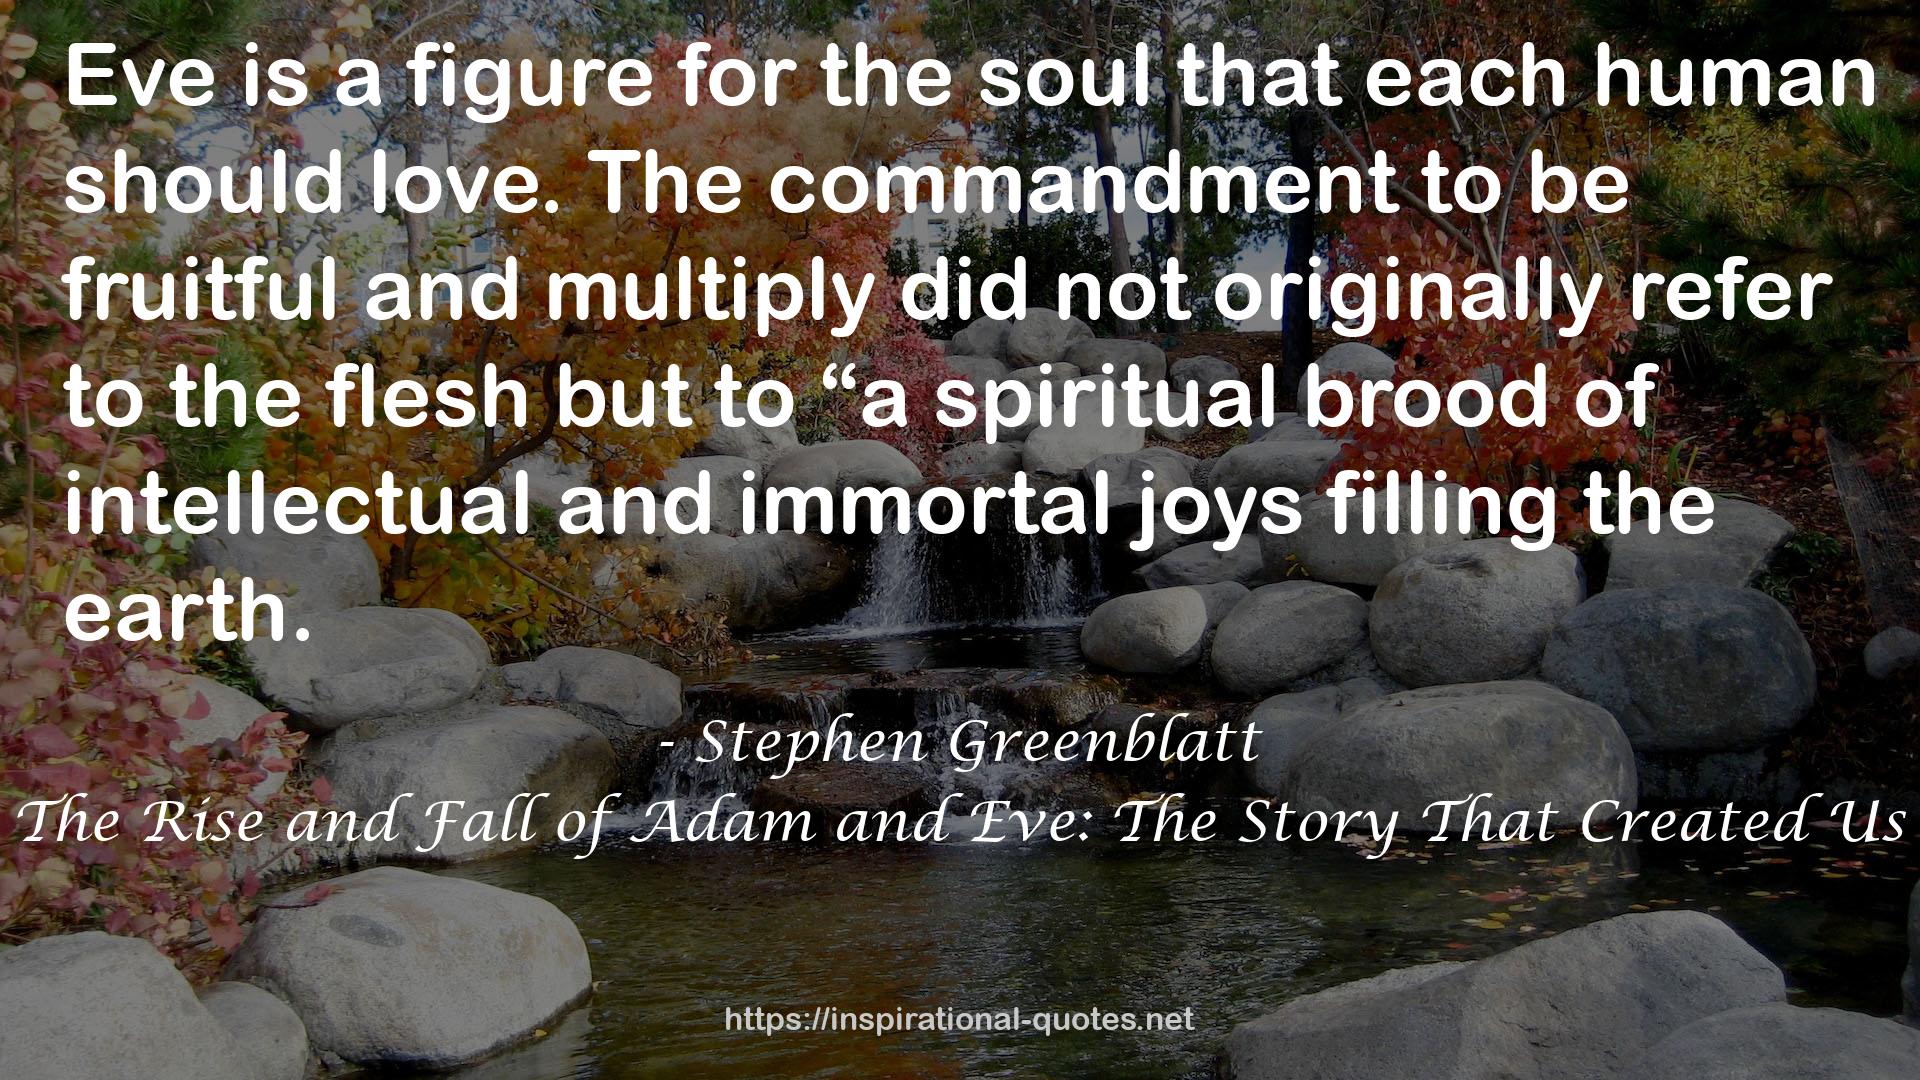 The Rise and Fall of Adam and Eve: The Story That Created Us QUOTES